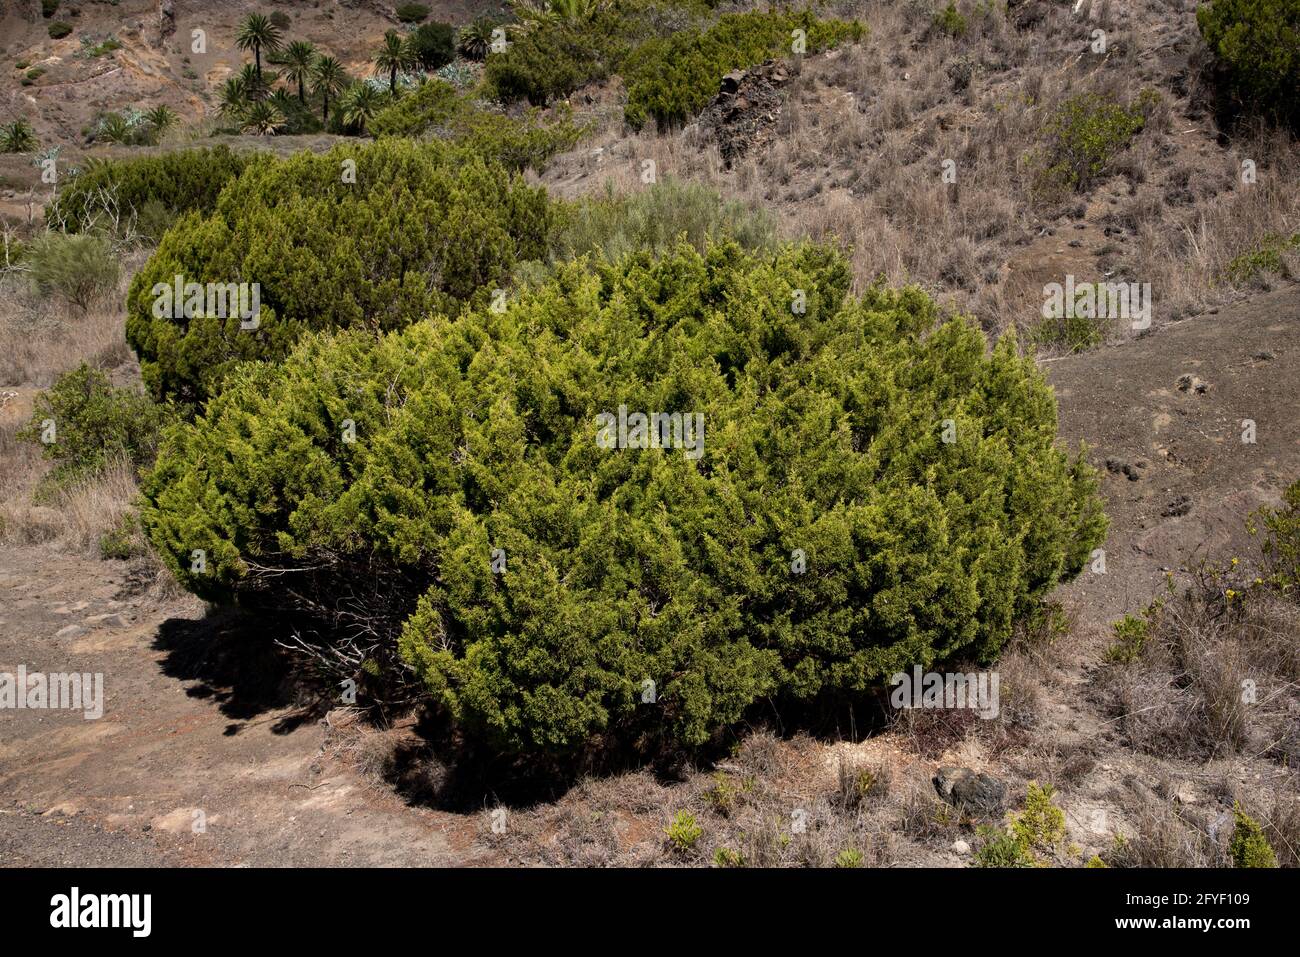 Canary Islands juniper is an endemic and endangered species on the western Canary Islands and Madeira growing here at 700 meter above sea level. Stock Photo